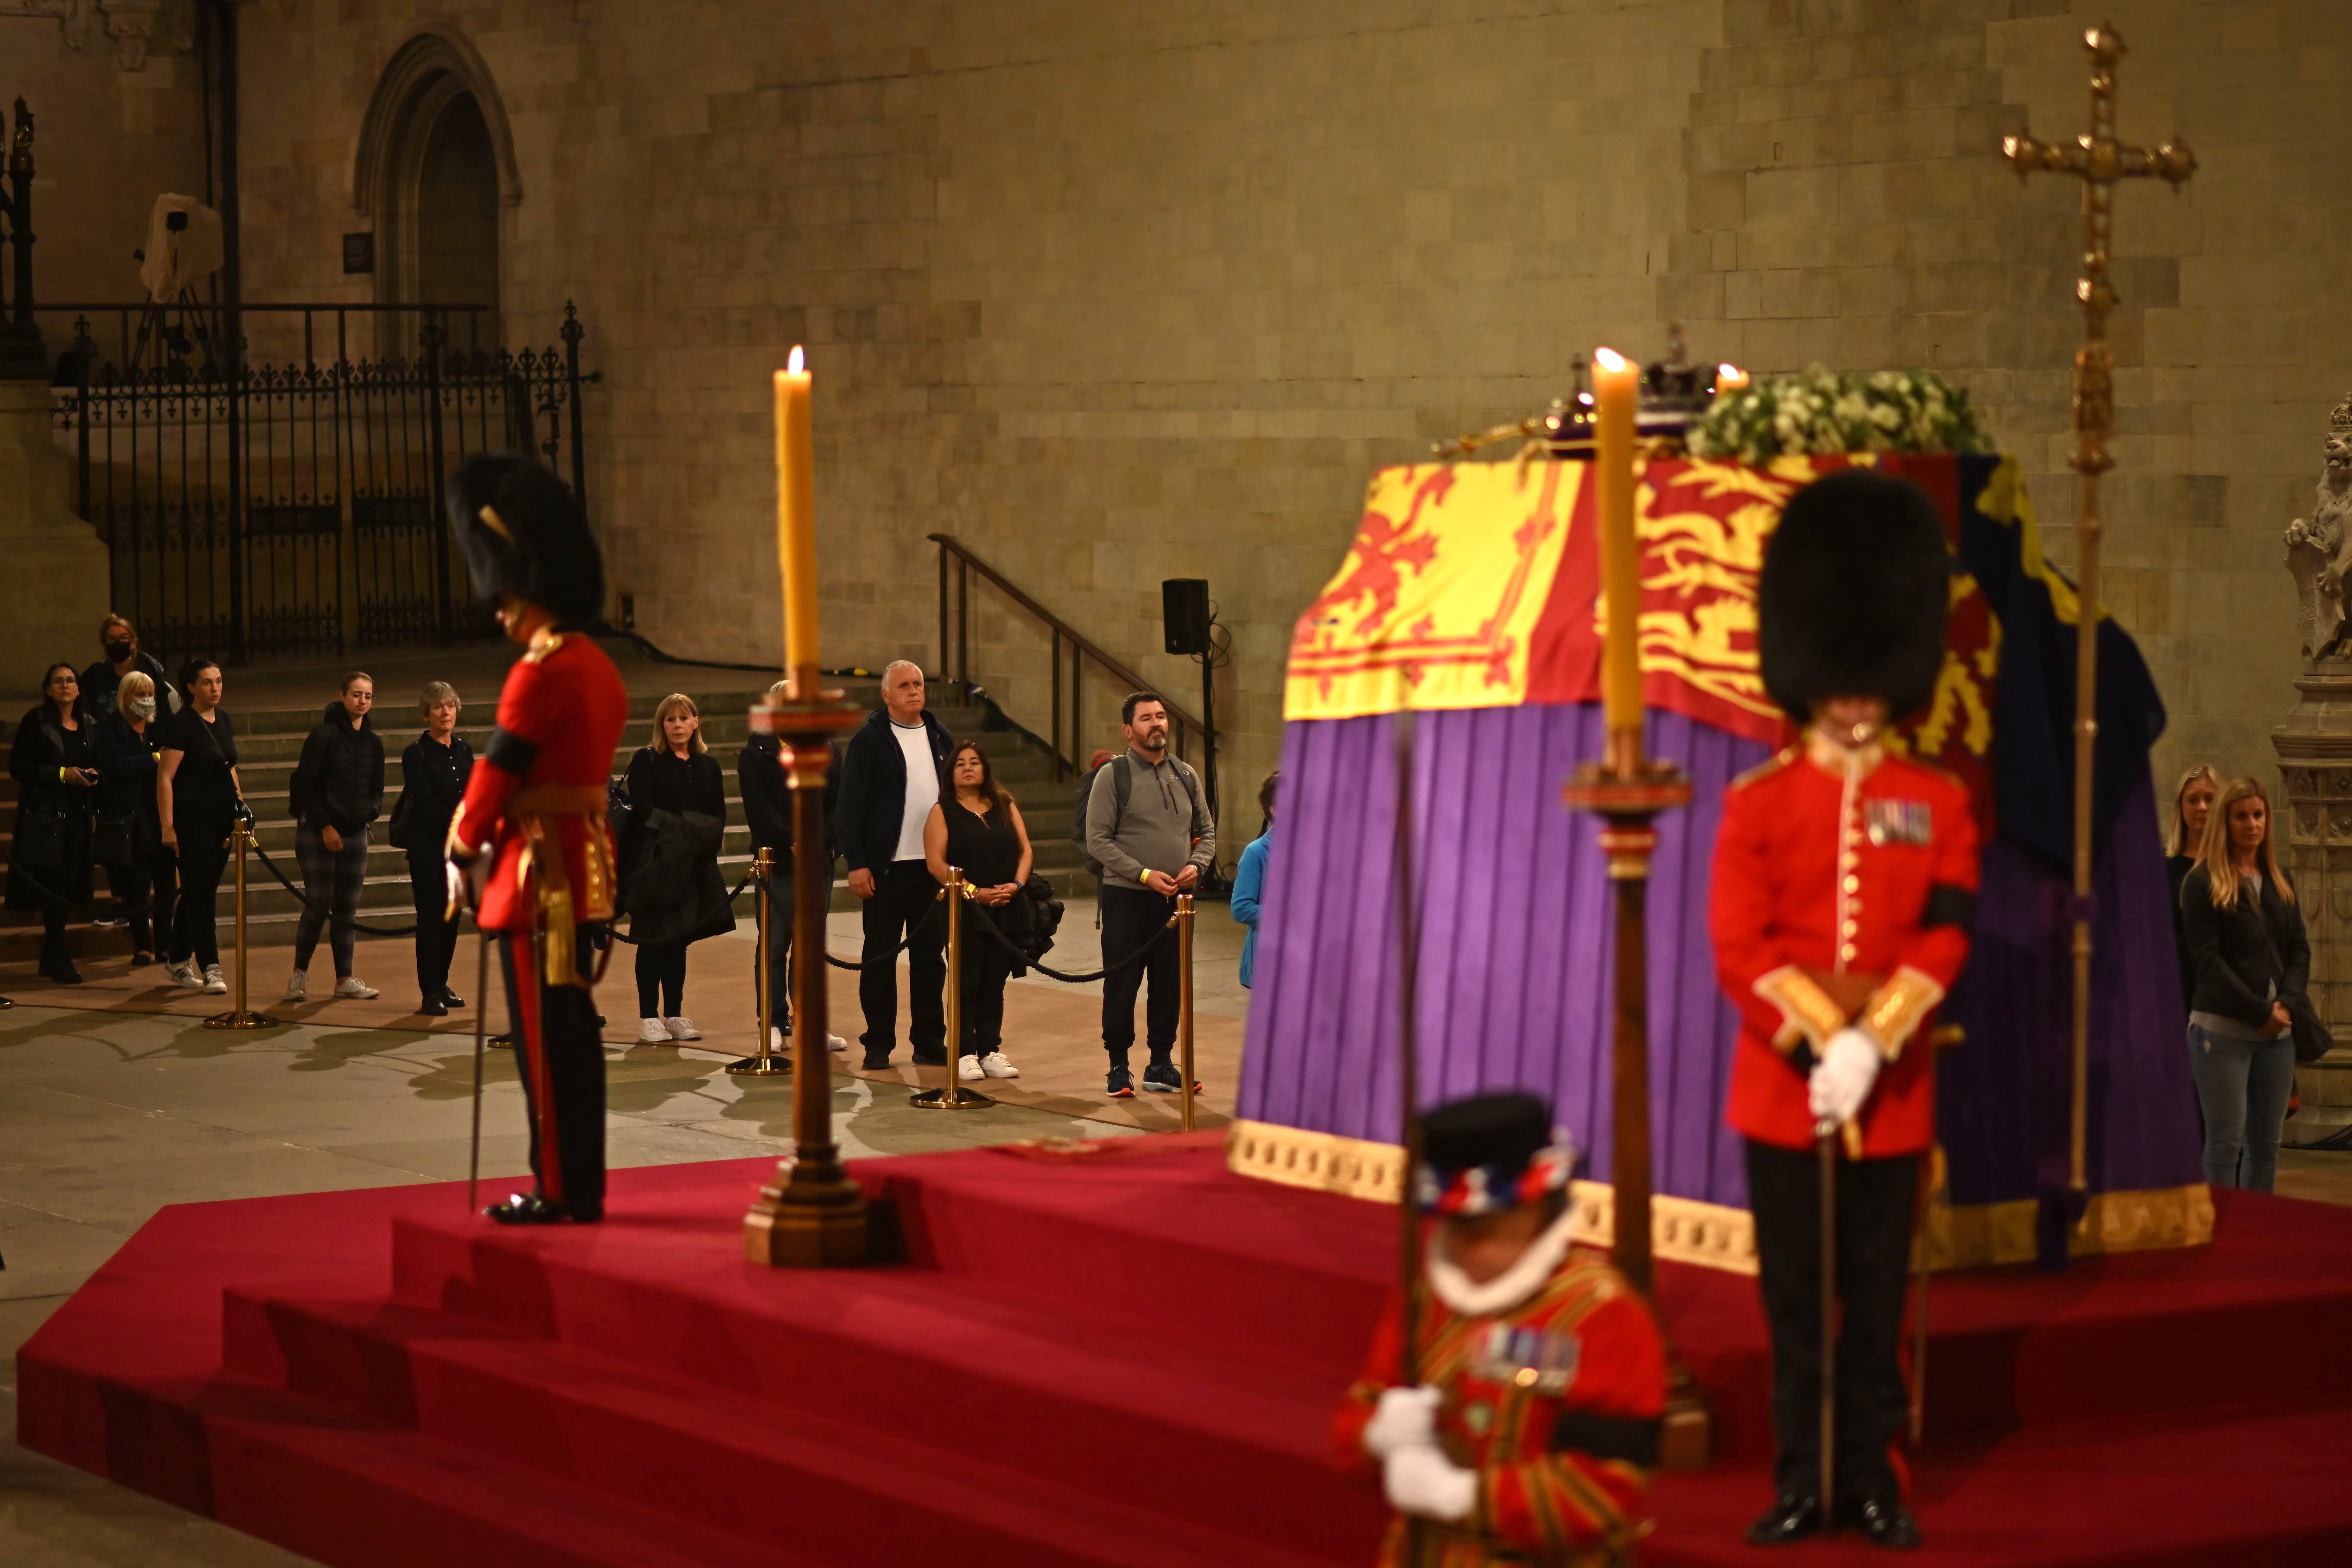 One of the royal guards watching over the Queen’s coffin at Westminster Hall has suddenly collapsed (Ben Stansall/PA)